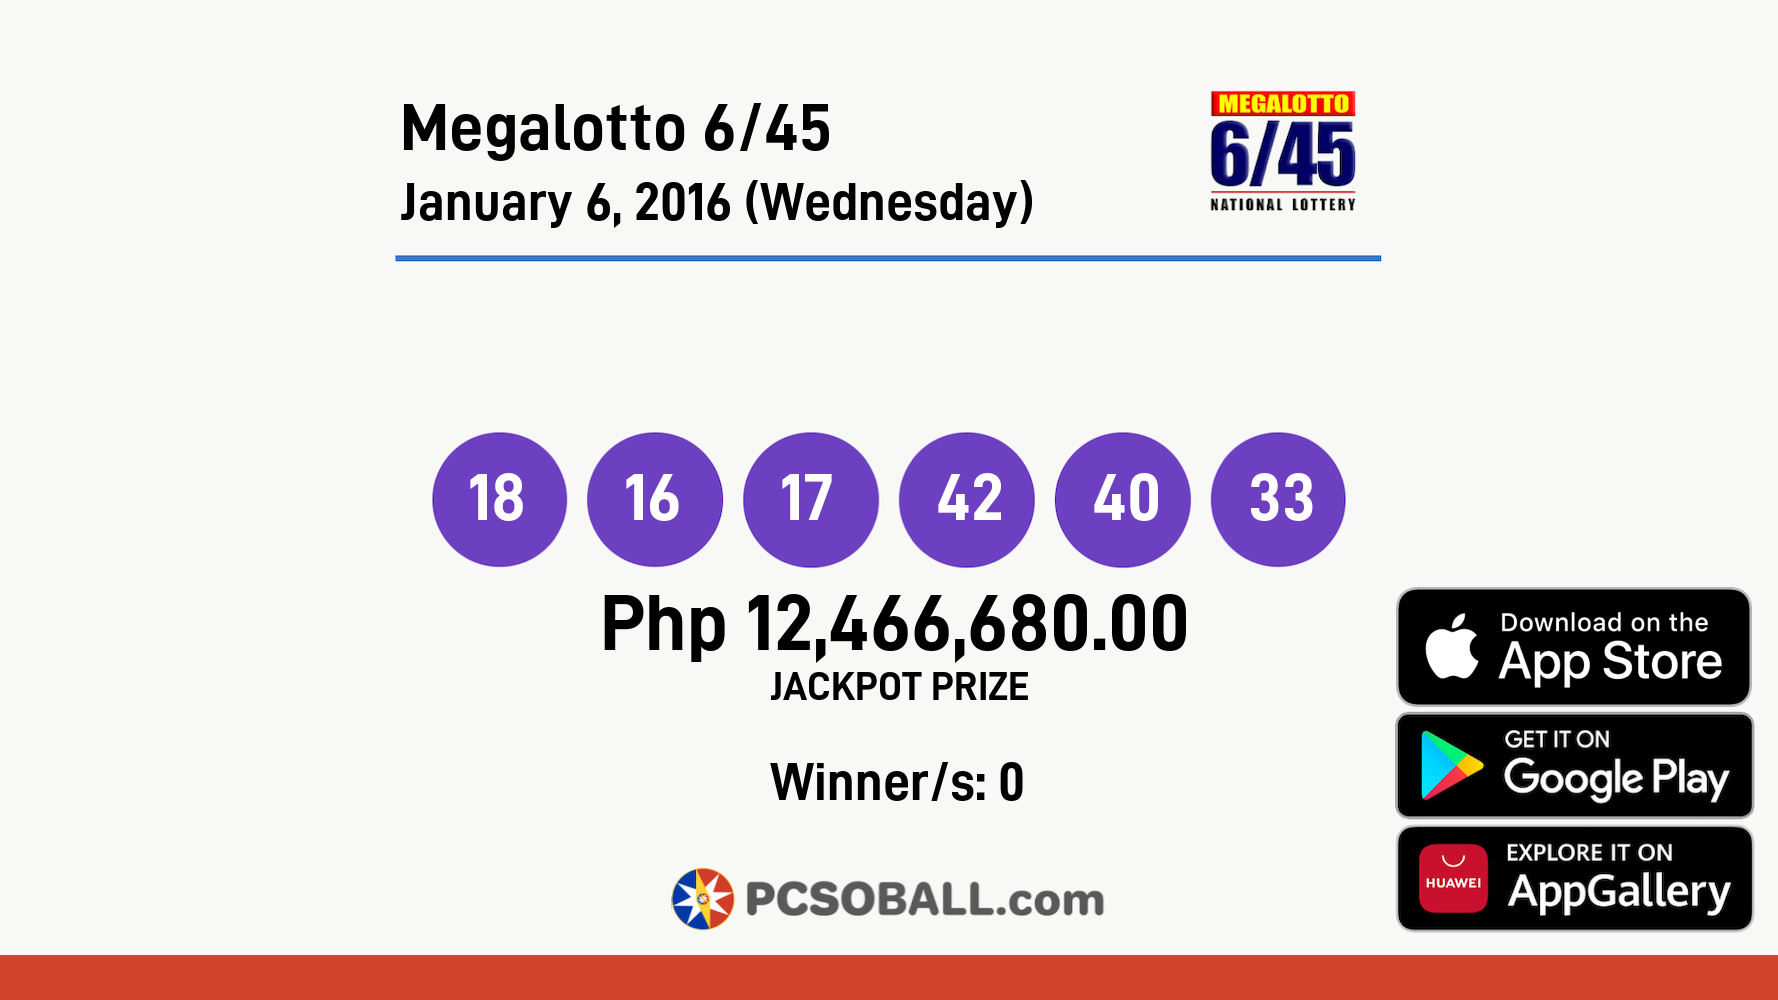 Megalotto 6/45 January 6, 2016 (Wednesday) Result